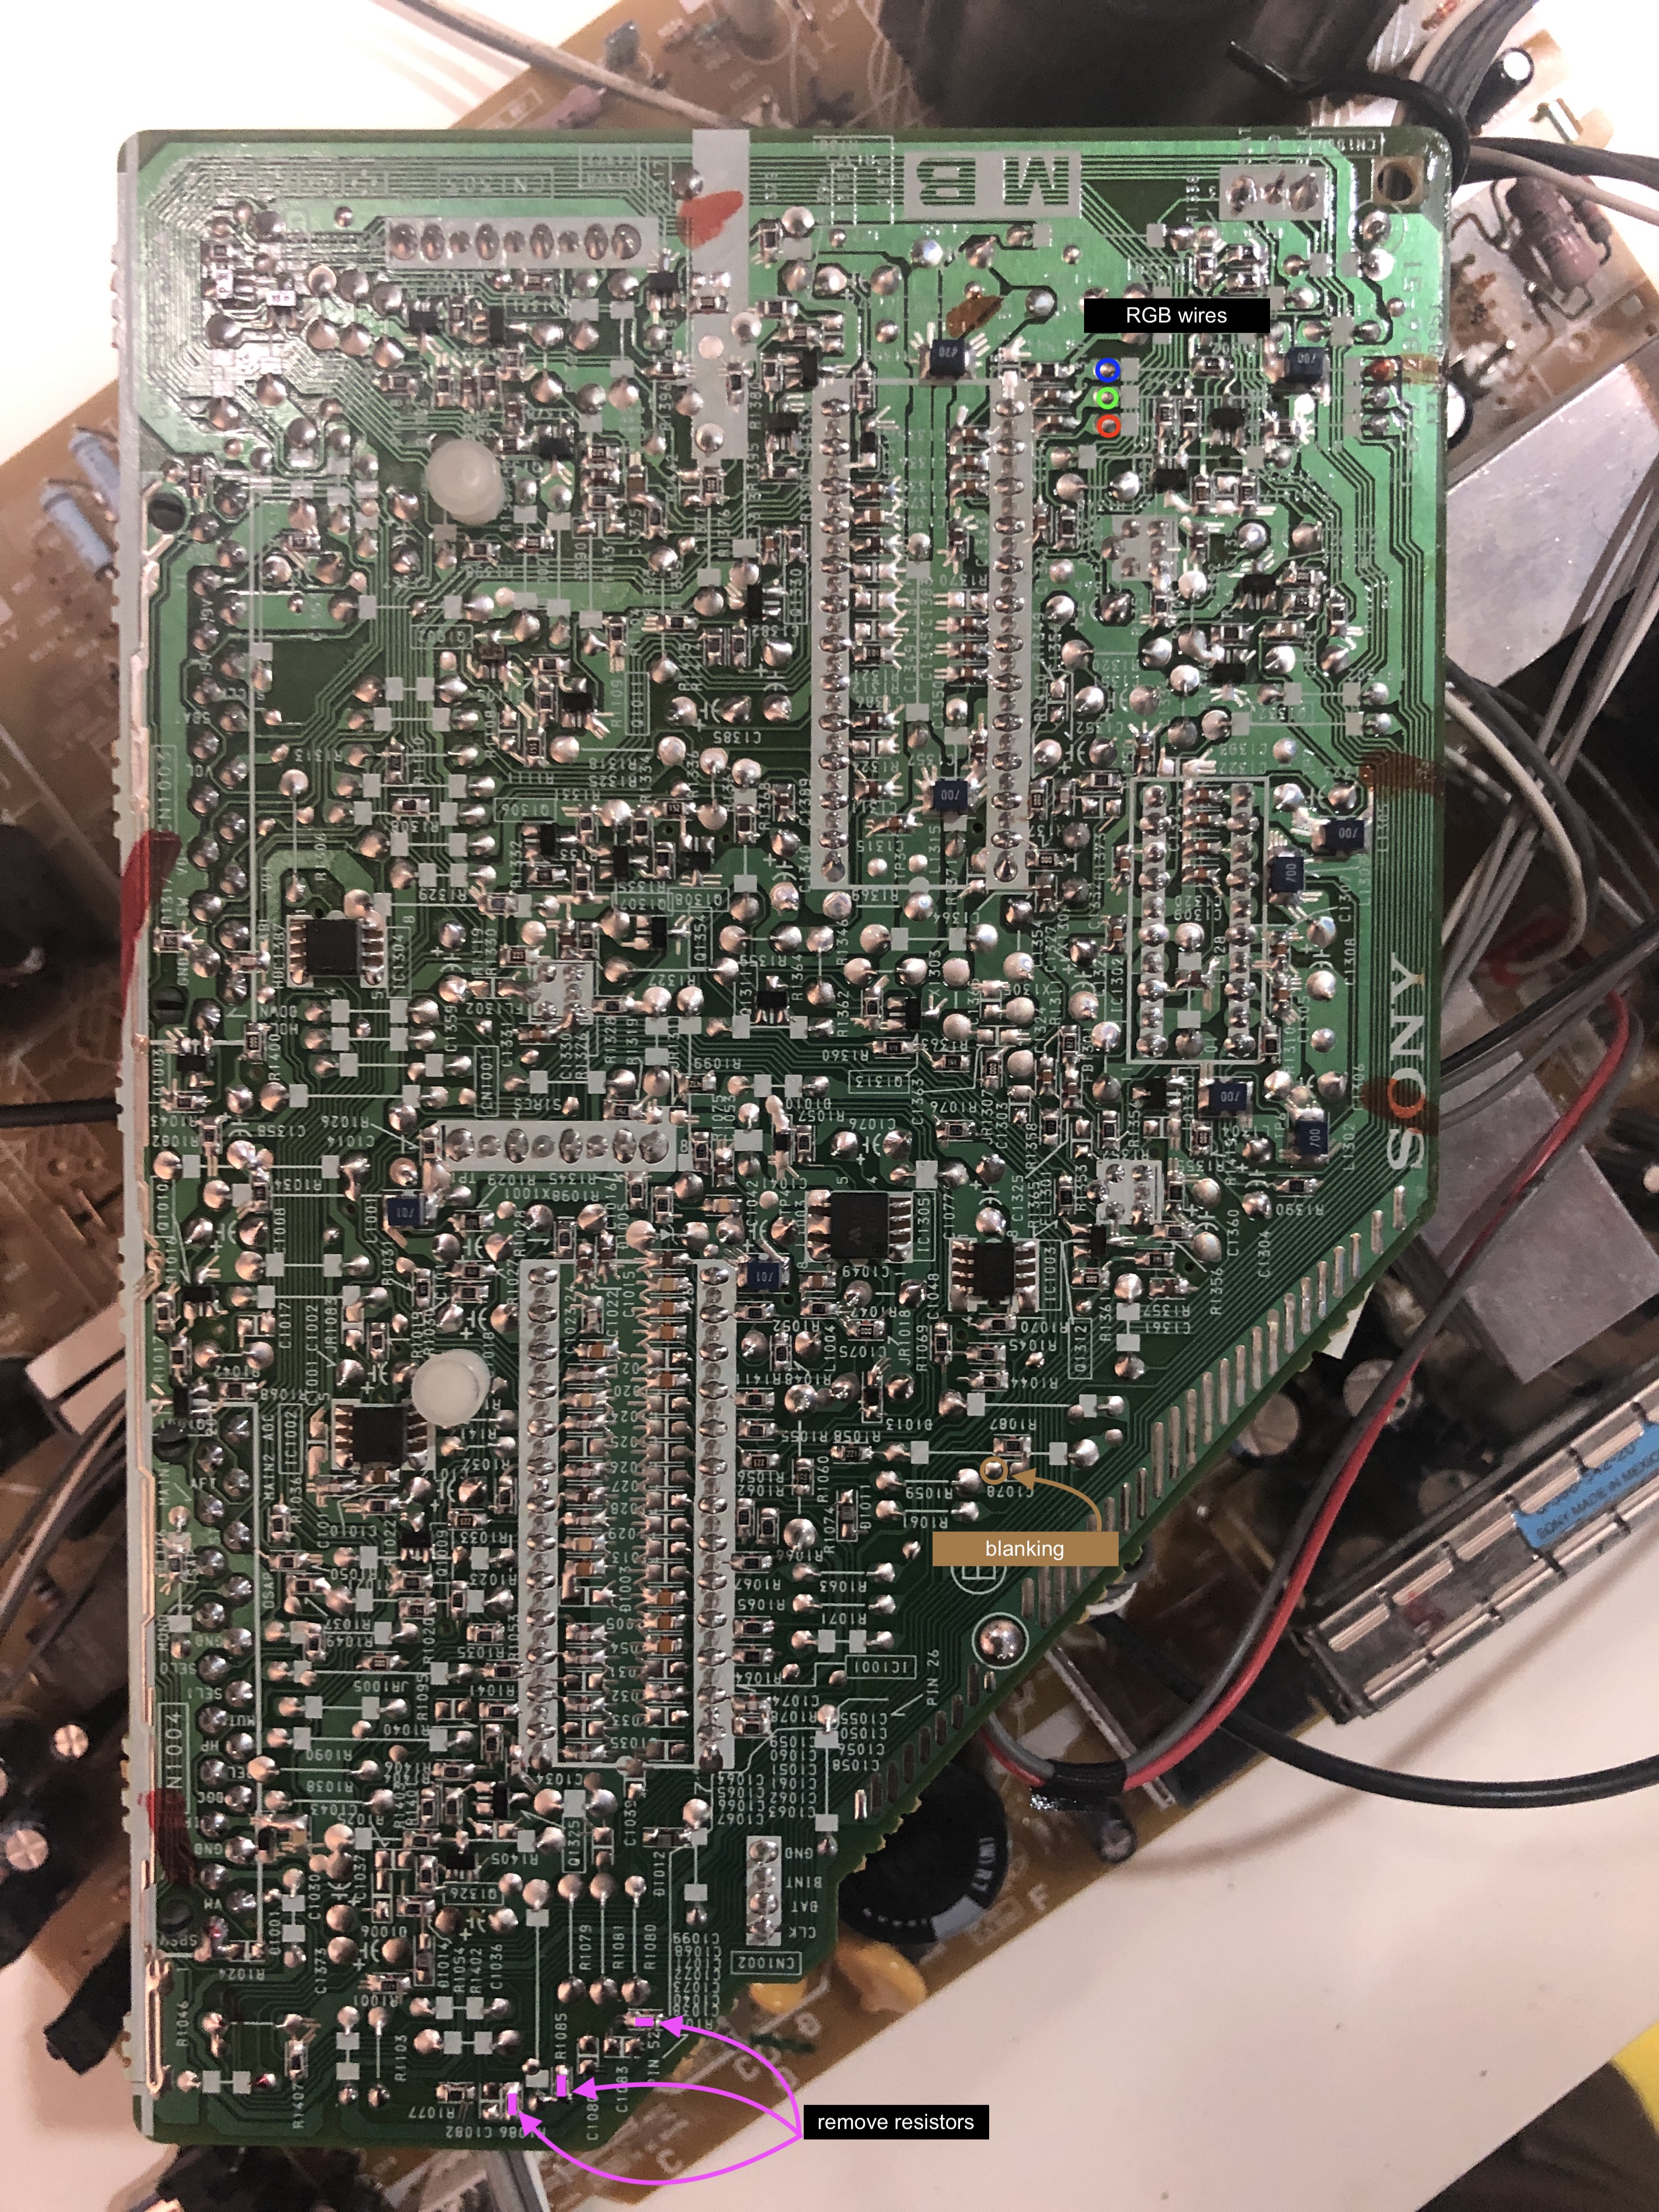 BA5 chassis - MB Board